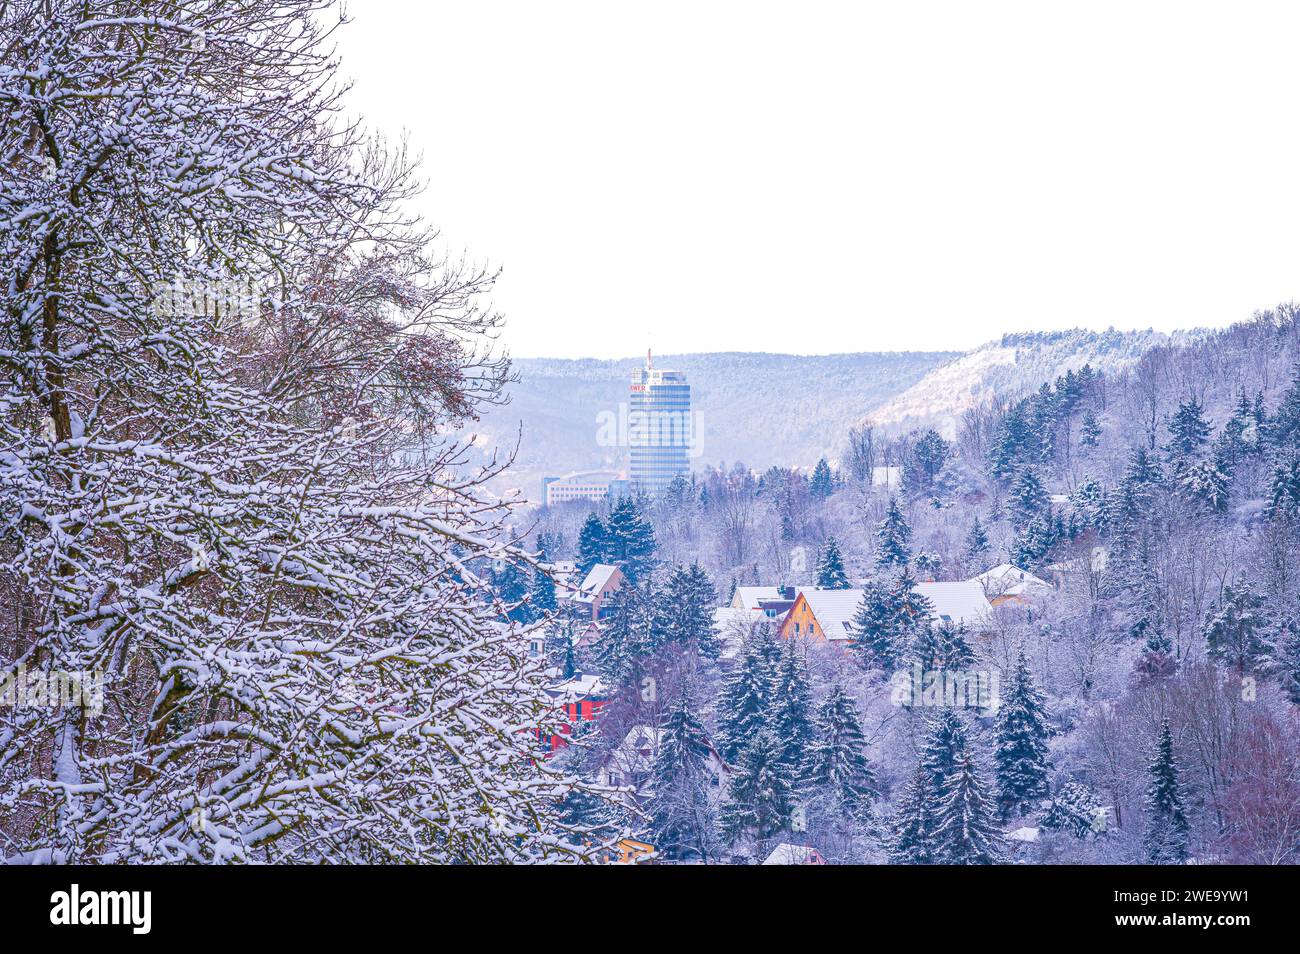 View Of The Snow-covered Jentower Of Jena With Mountains And Forests In The Background, Jena, Thüringen, Germany Stock Photo